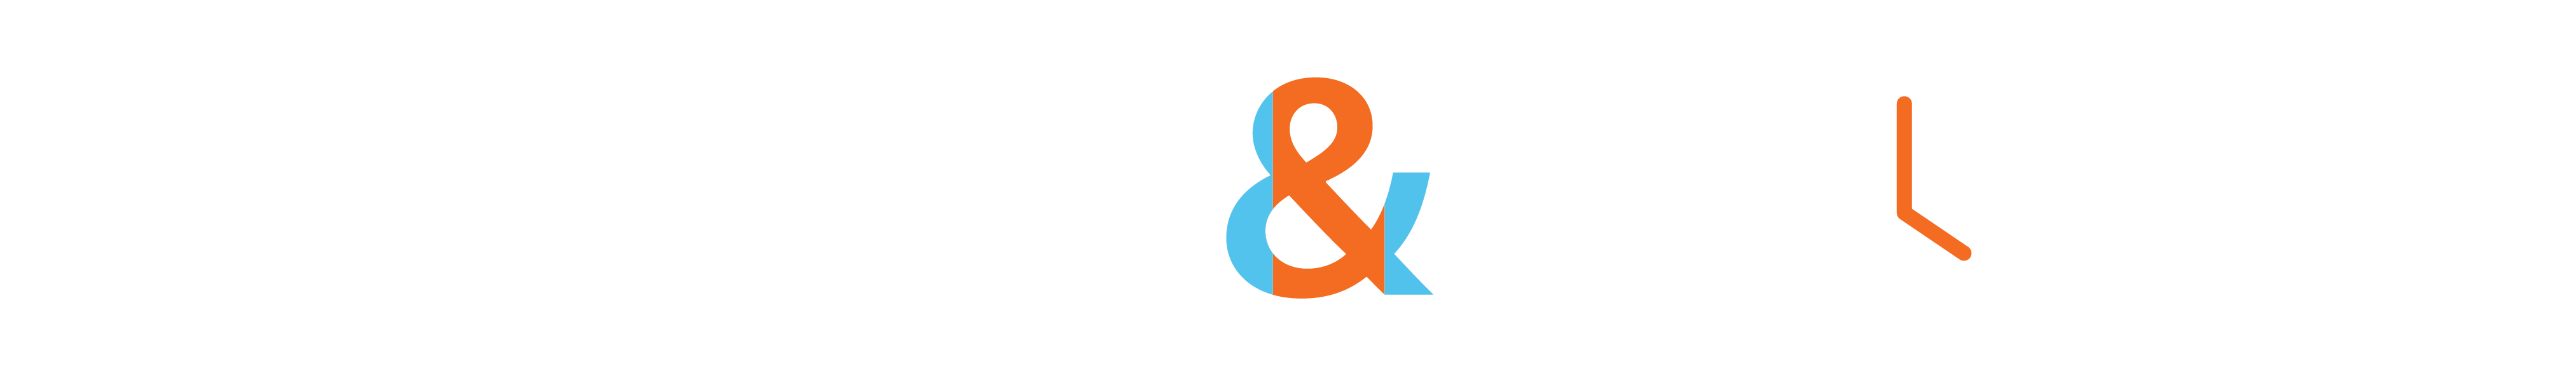 then-and-now-logo-reverse